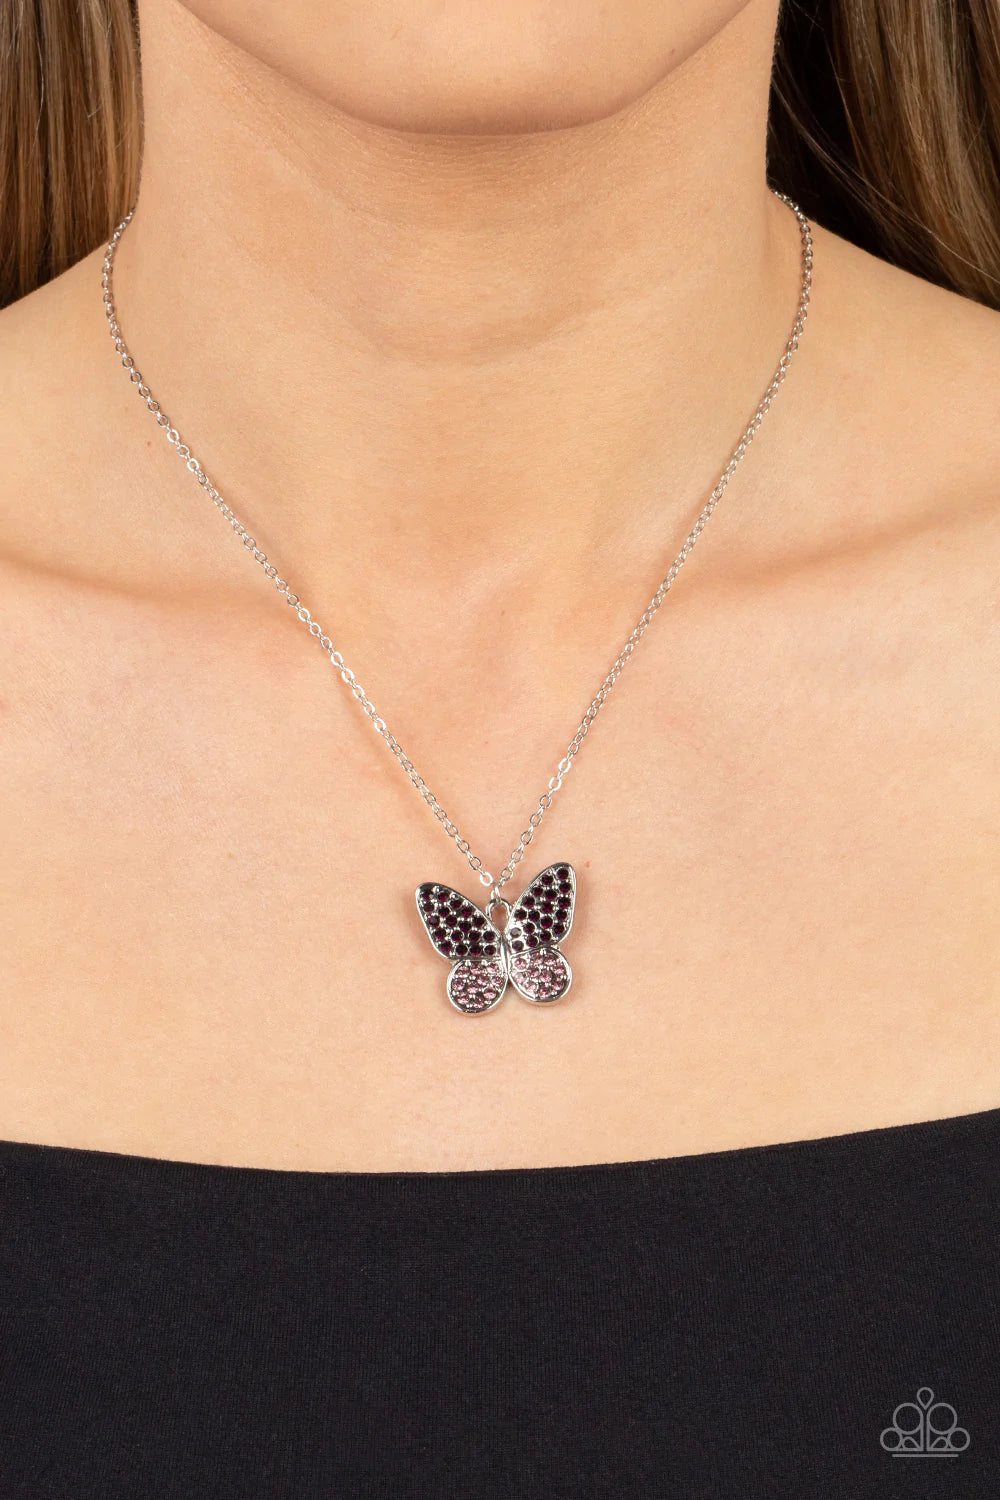 Paparazzi Accessories Flutter Forte - Purple Dotted in dark and light purple rhinestones, a whimsical silver butterfly flutters along a dainty silver chain below the collar for an enchanting fashion. Features an adjustable clasp closure. Sold as one indiv